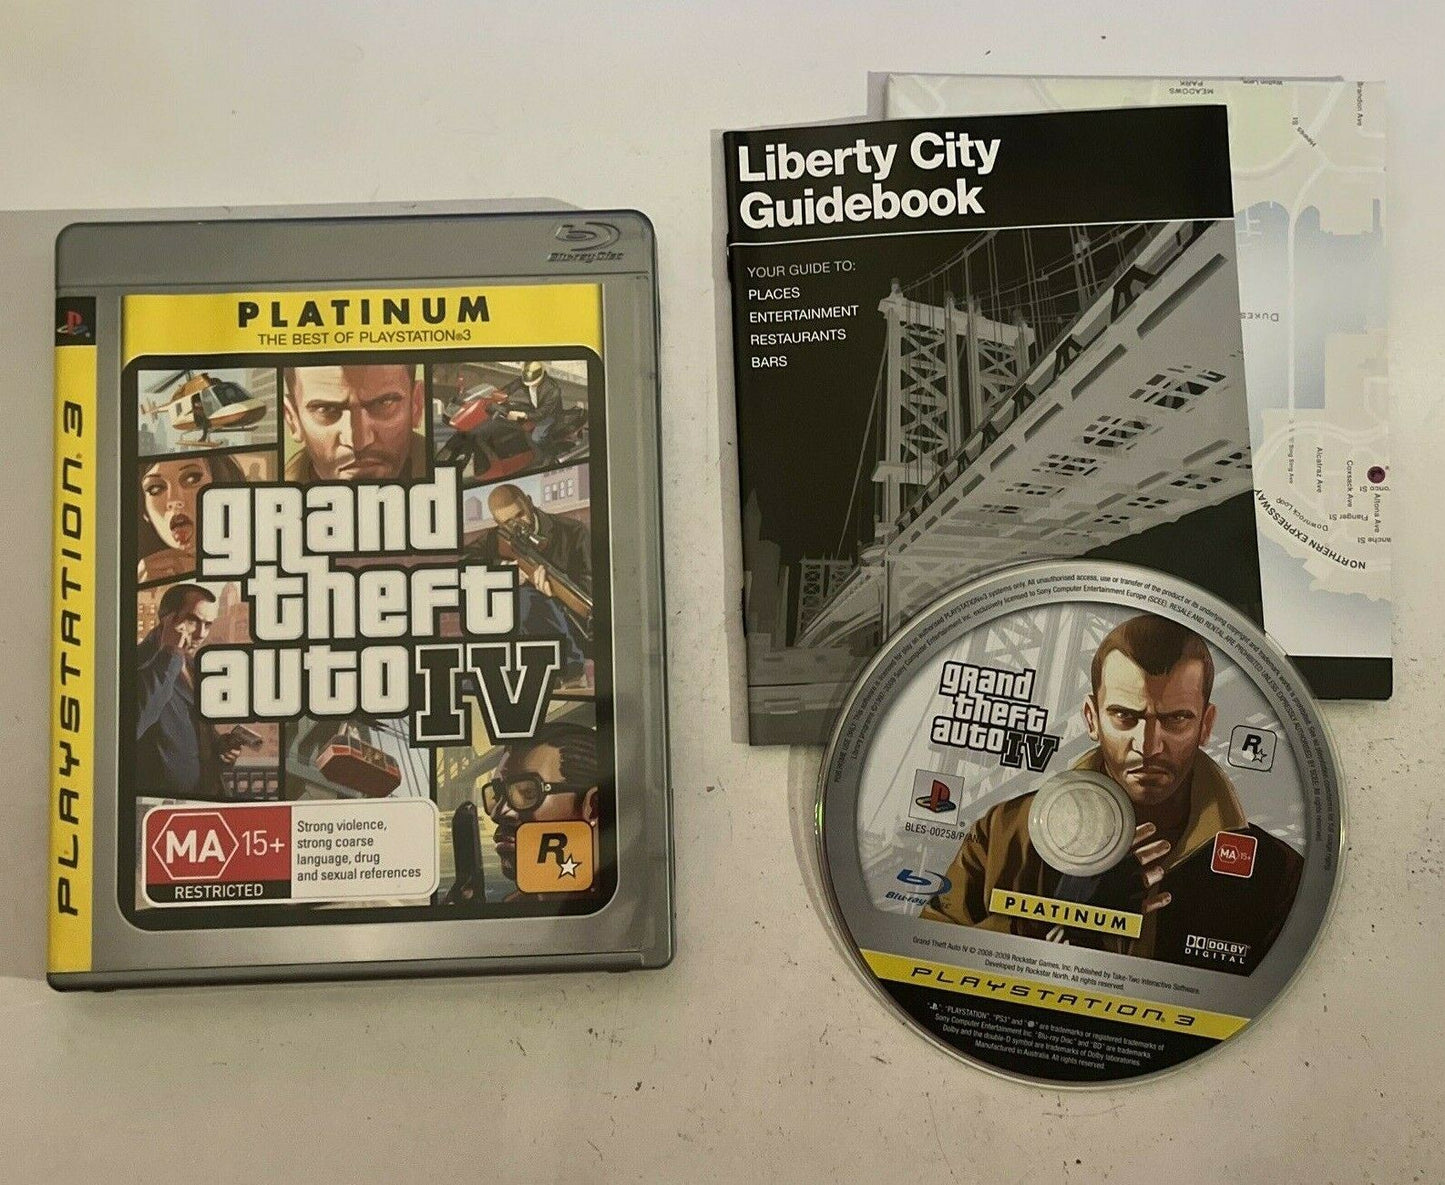 Grand Theft Auto IV GTA 4 - PlayStation 3 PS3 Game Complete with Manual and Map